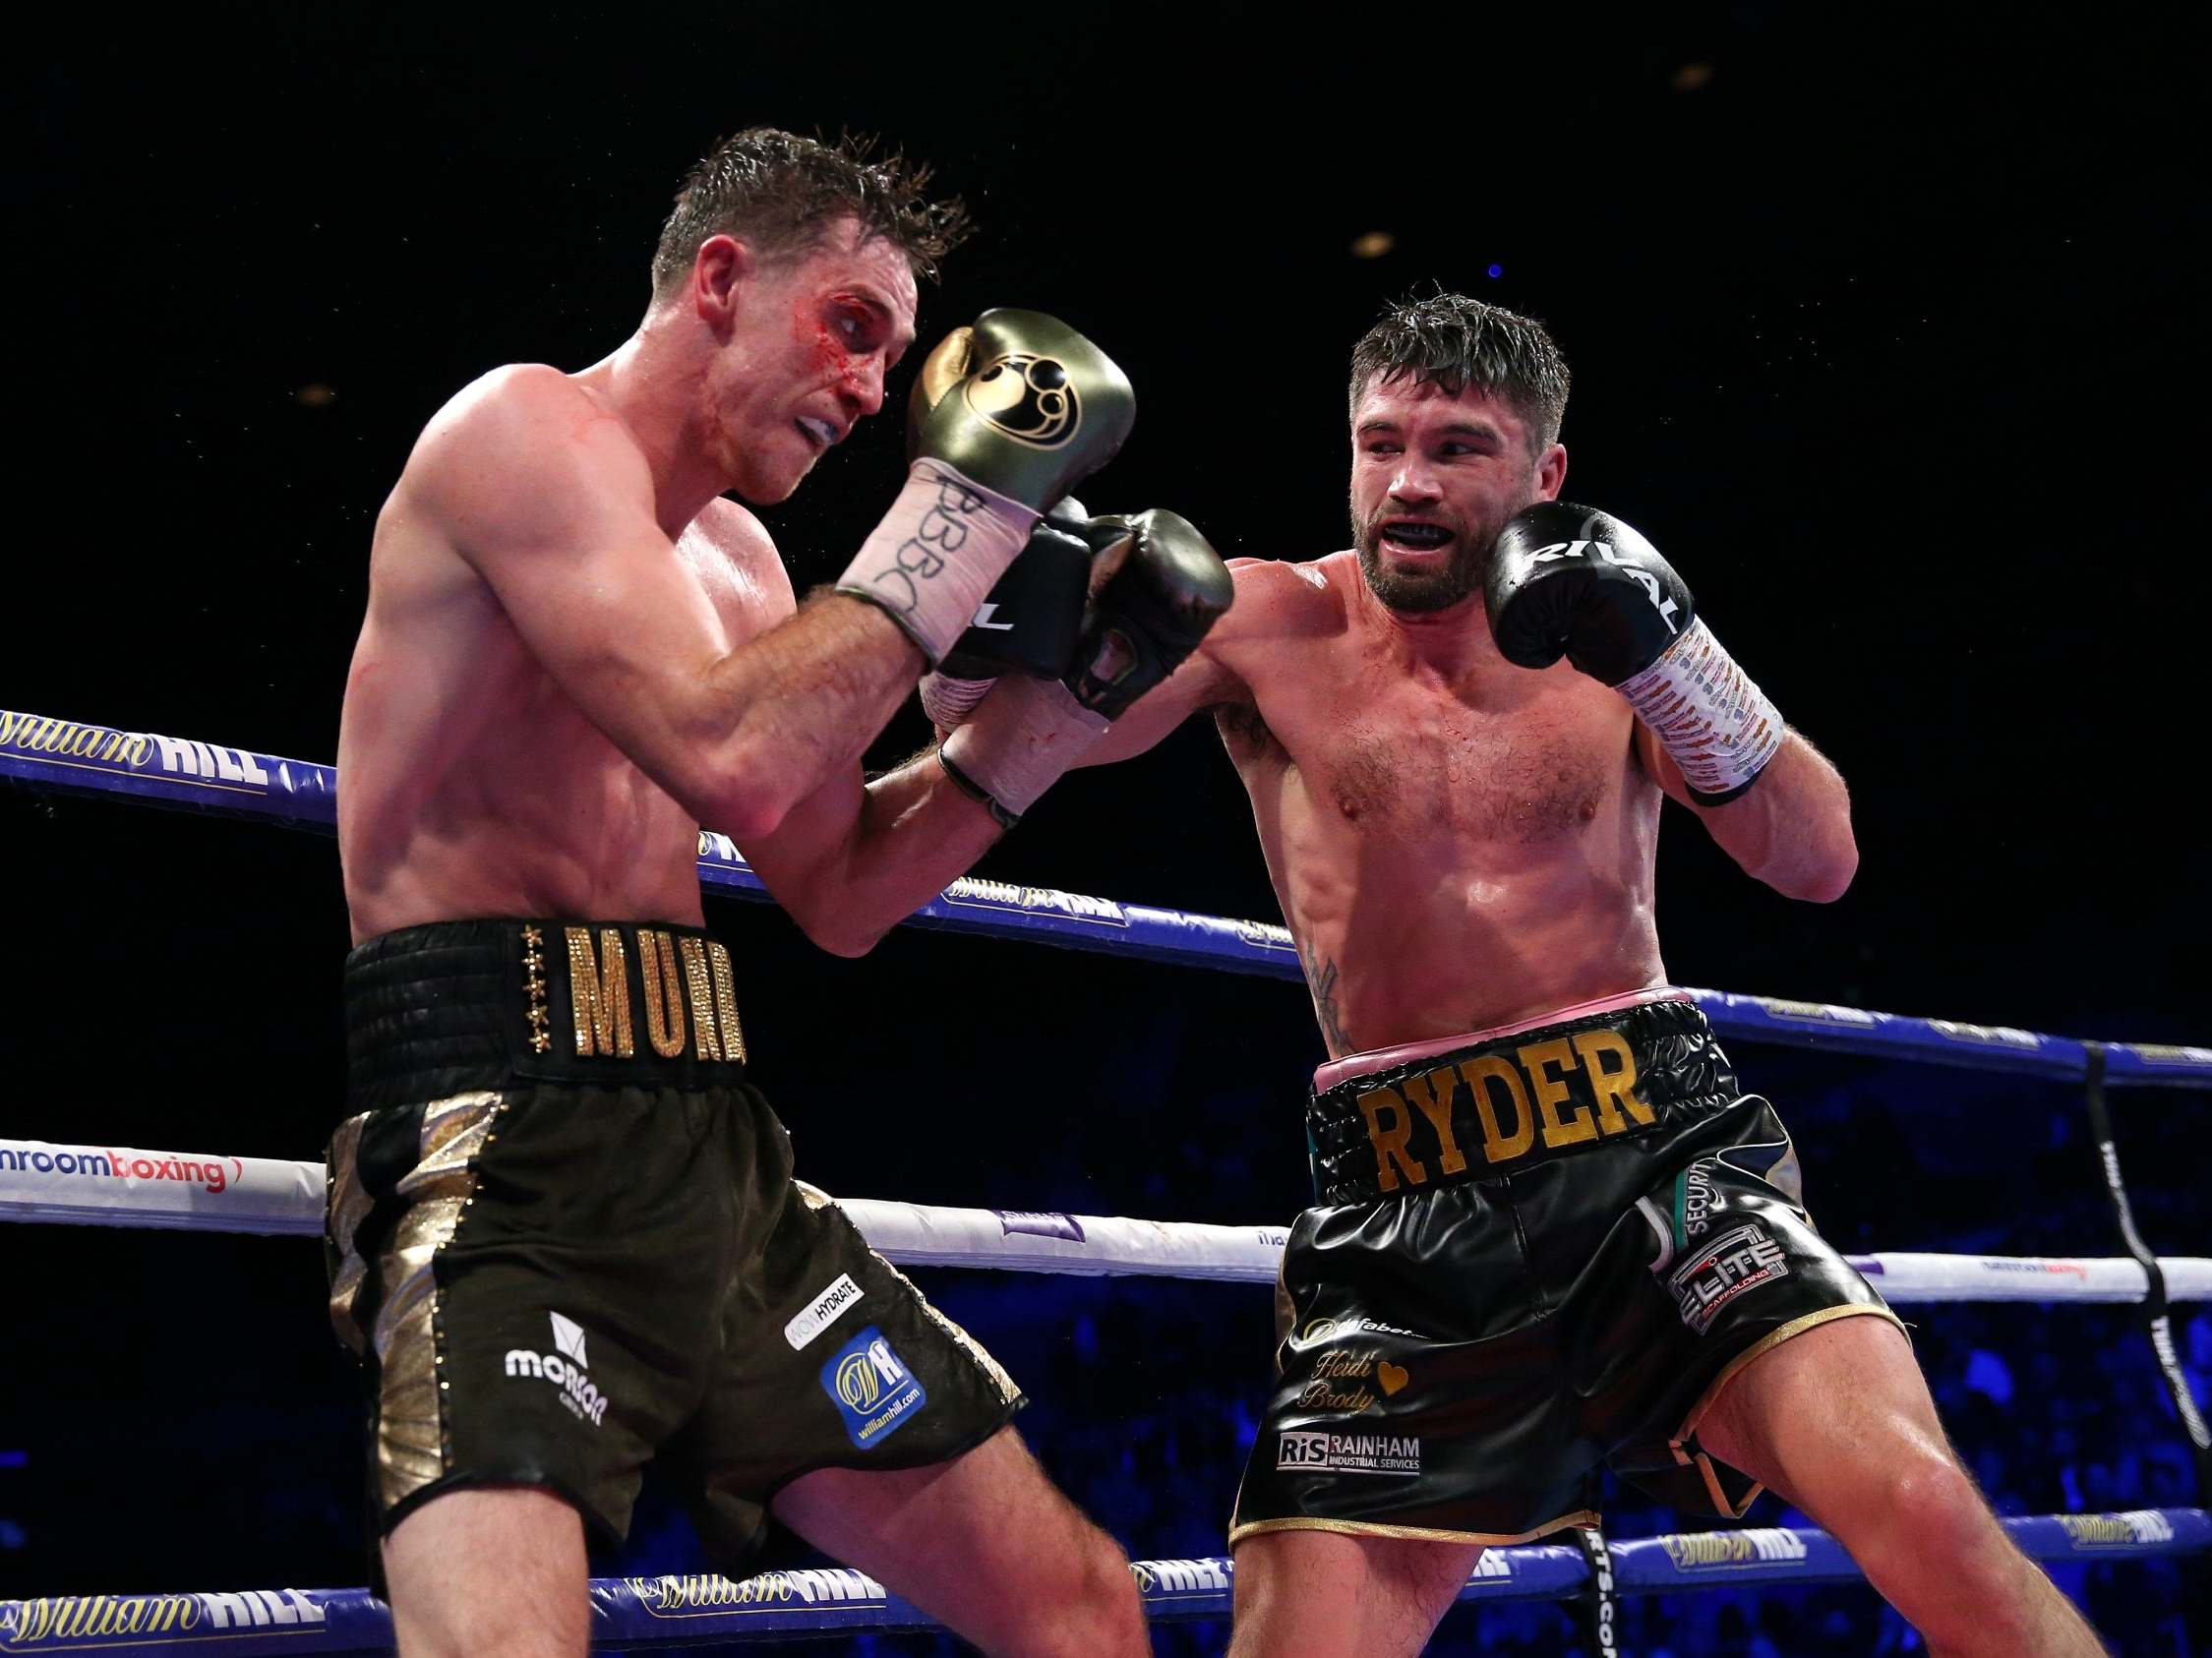 John Ryder staggered Callum Smith in the 11th round